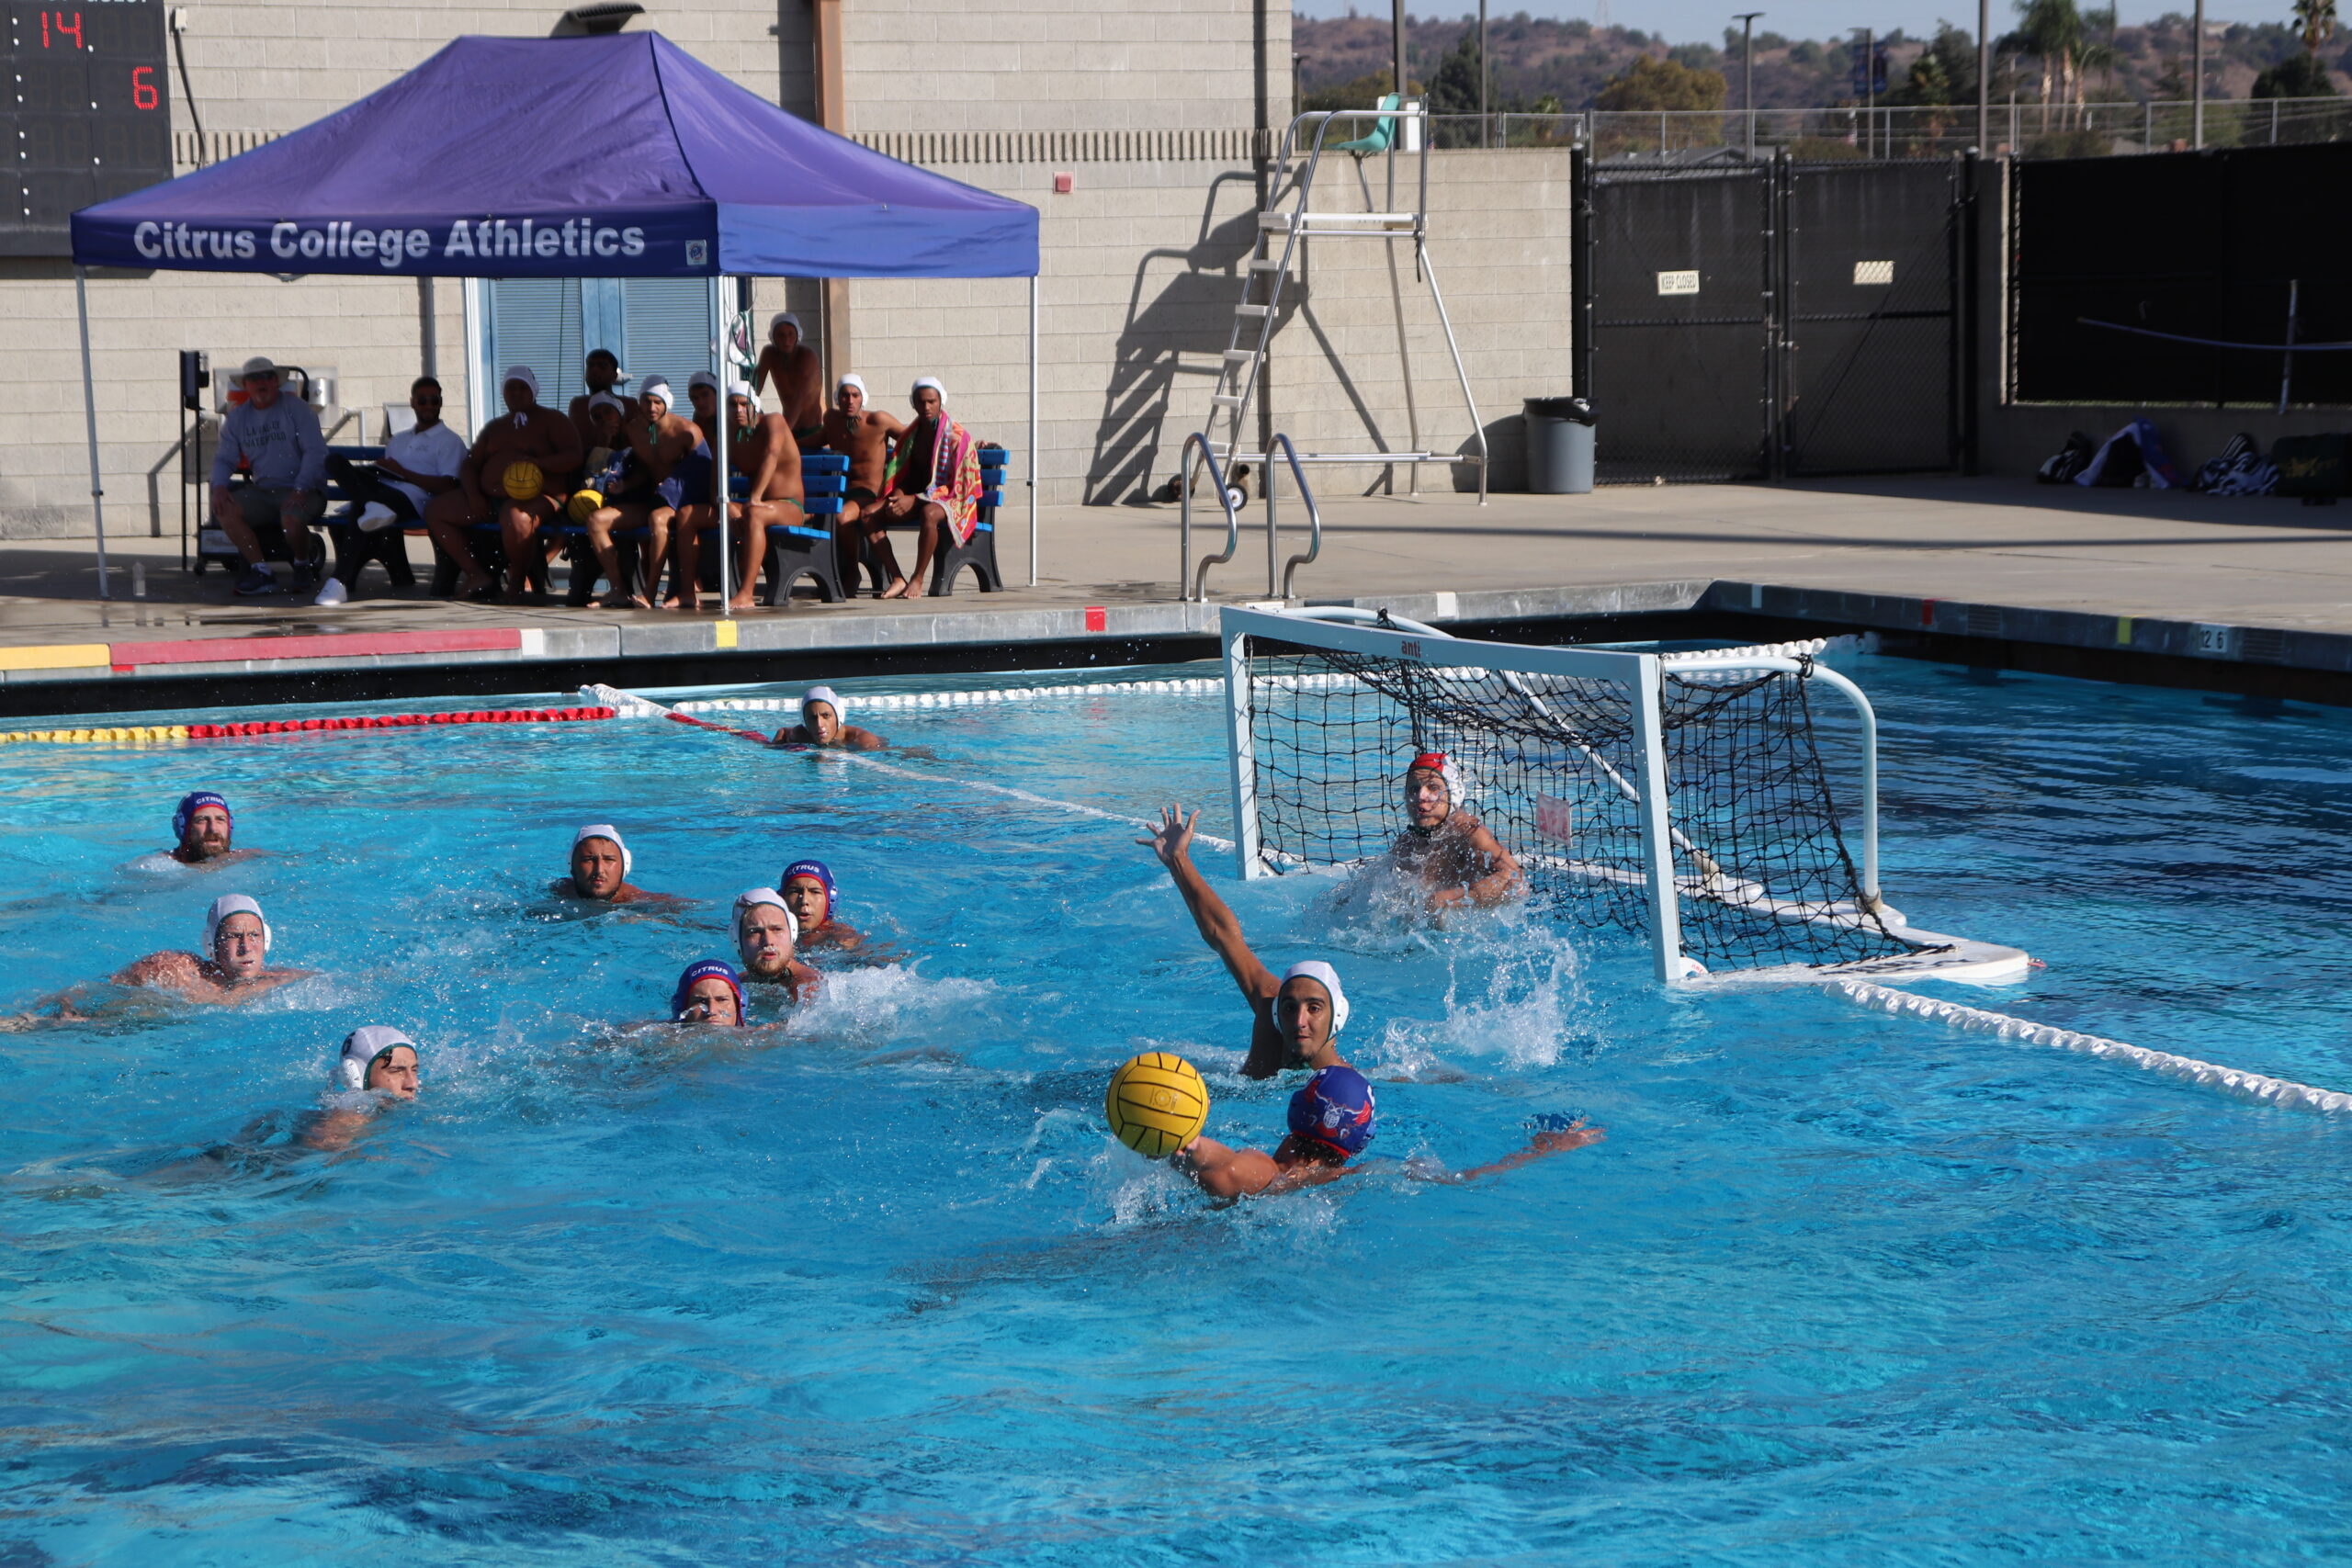 Men’s water polo at Citrus College off to a hot start